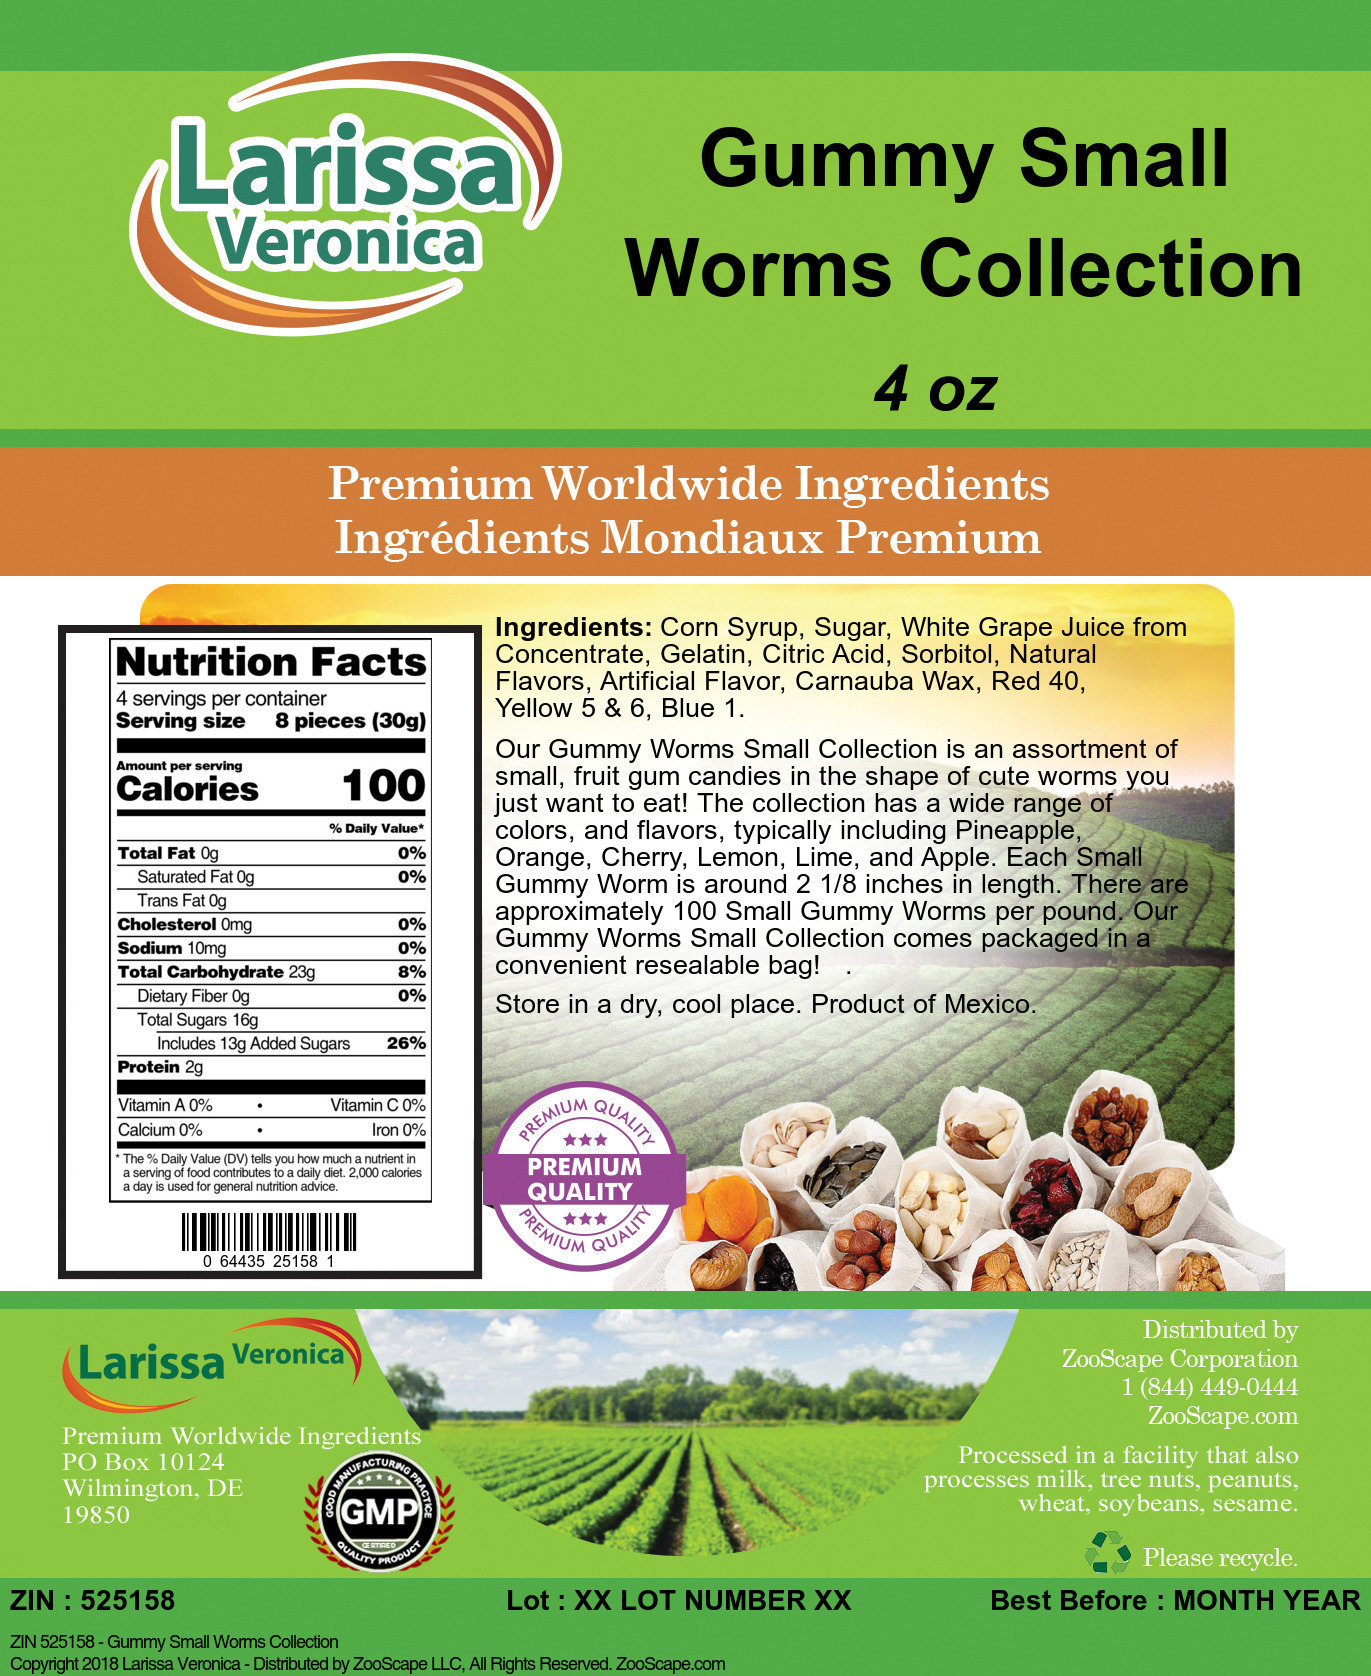 Gummy Small Worms Collection - Label